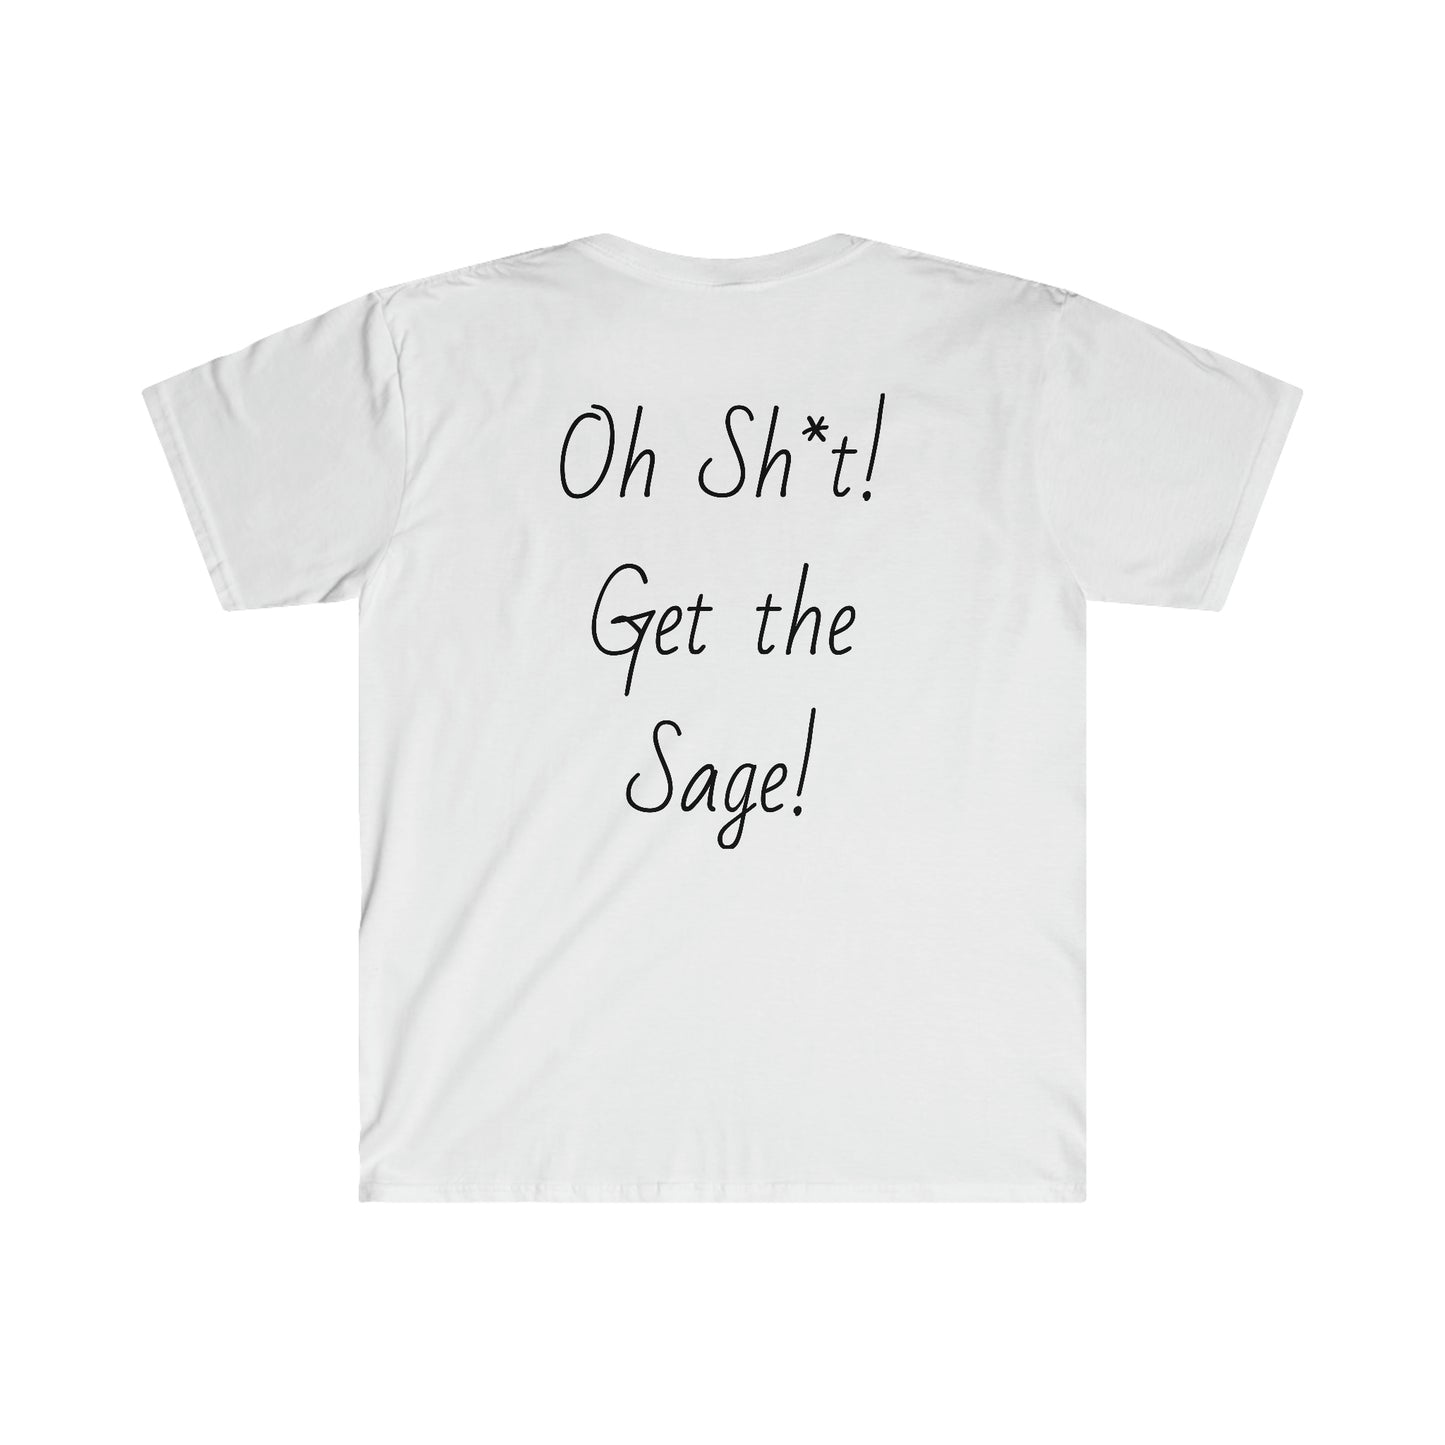 Oh Sh*t! Get the Sage!   Booze, Boos and my favorite Boos  T-Shirt